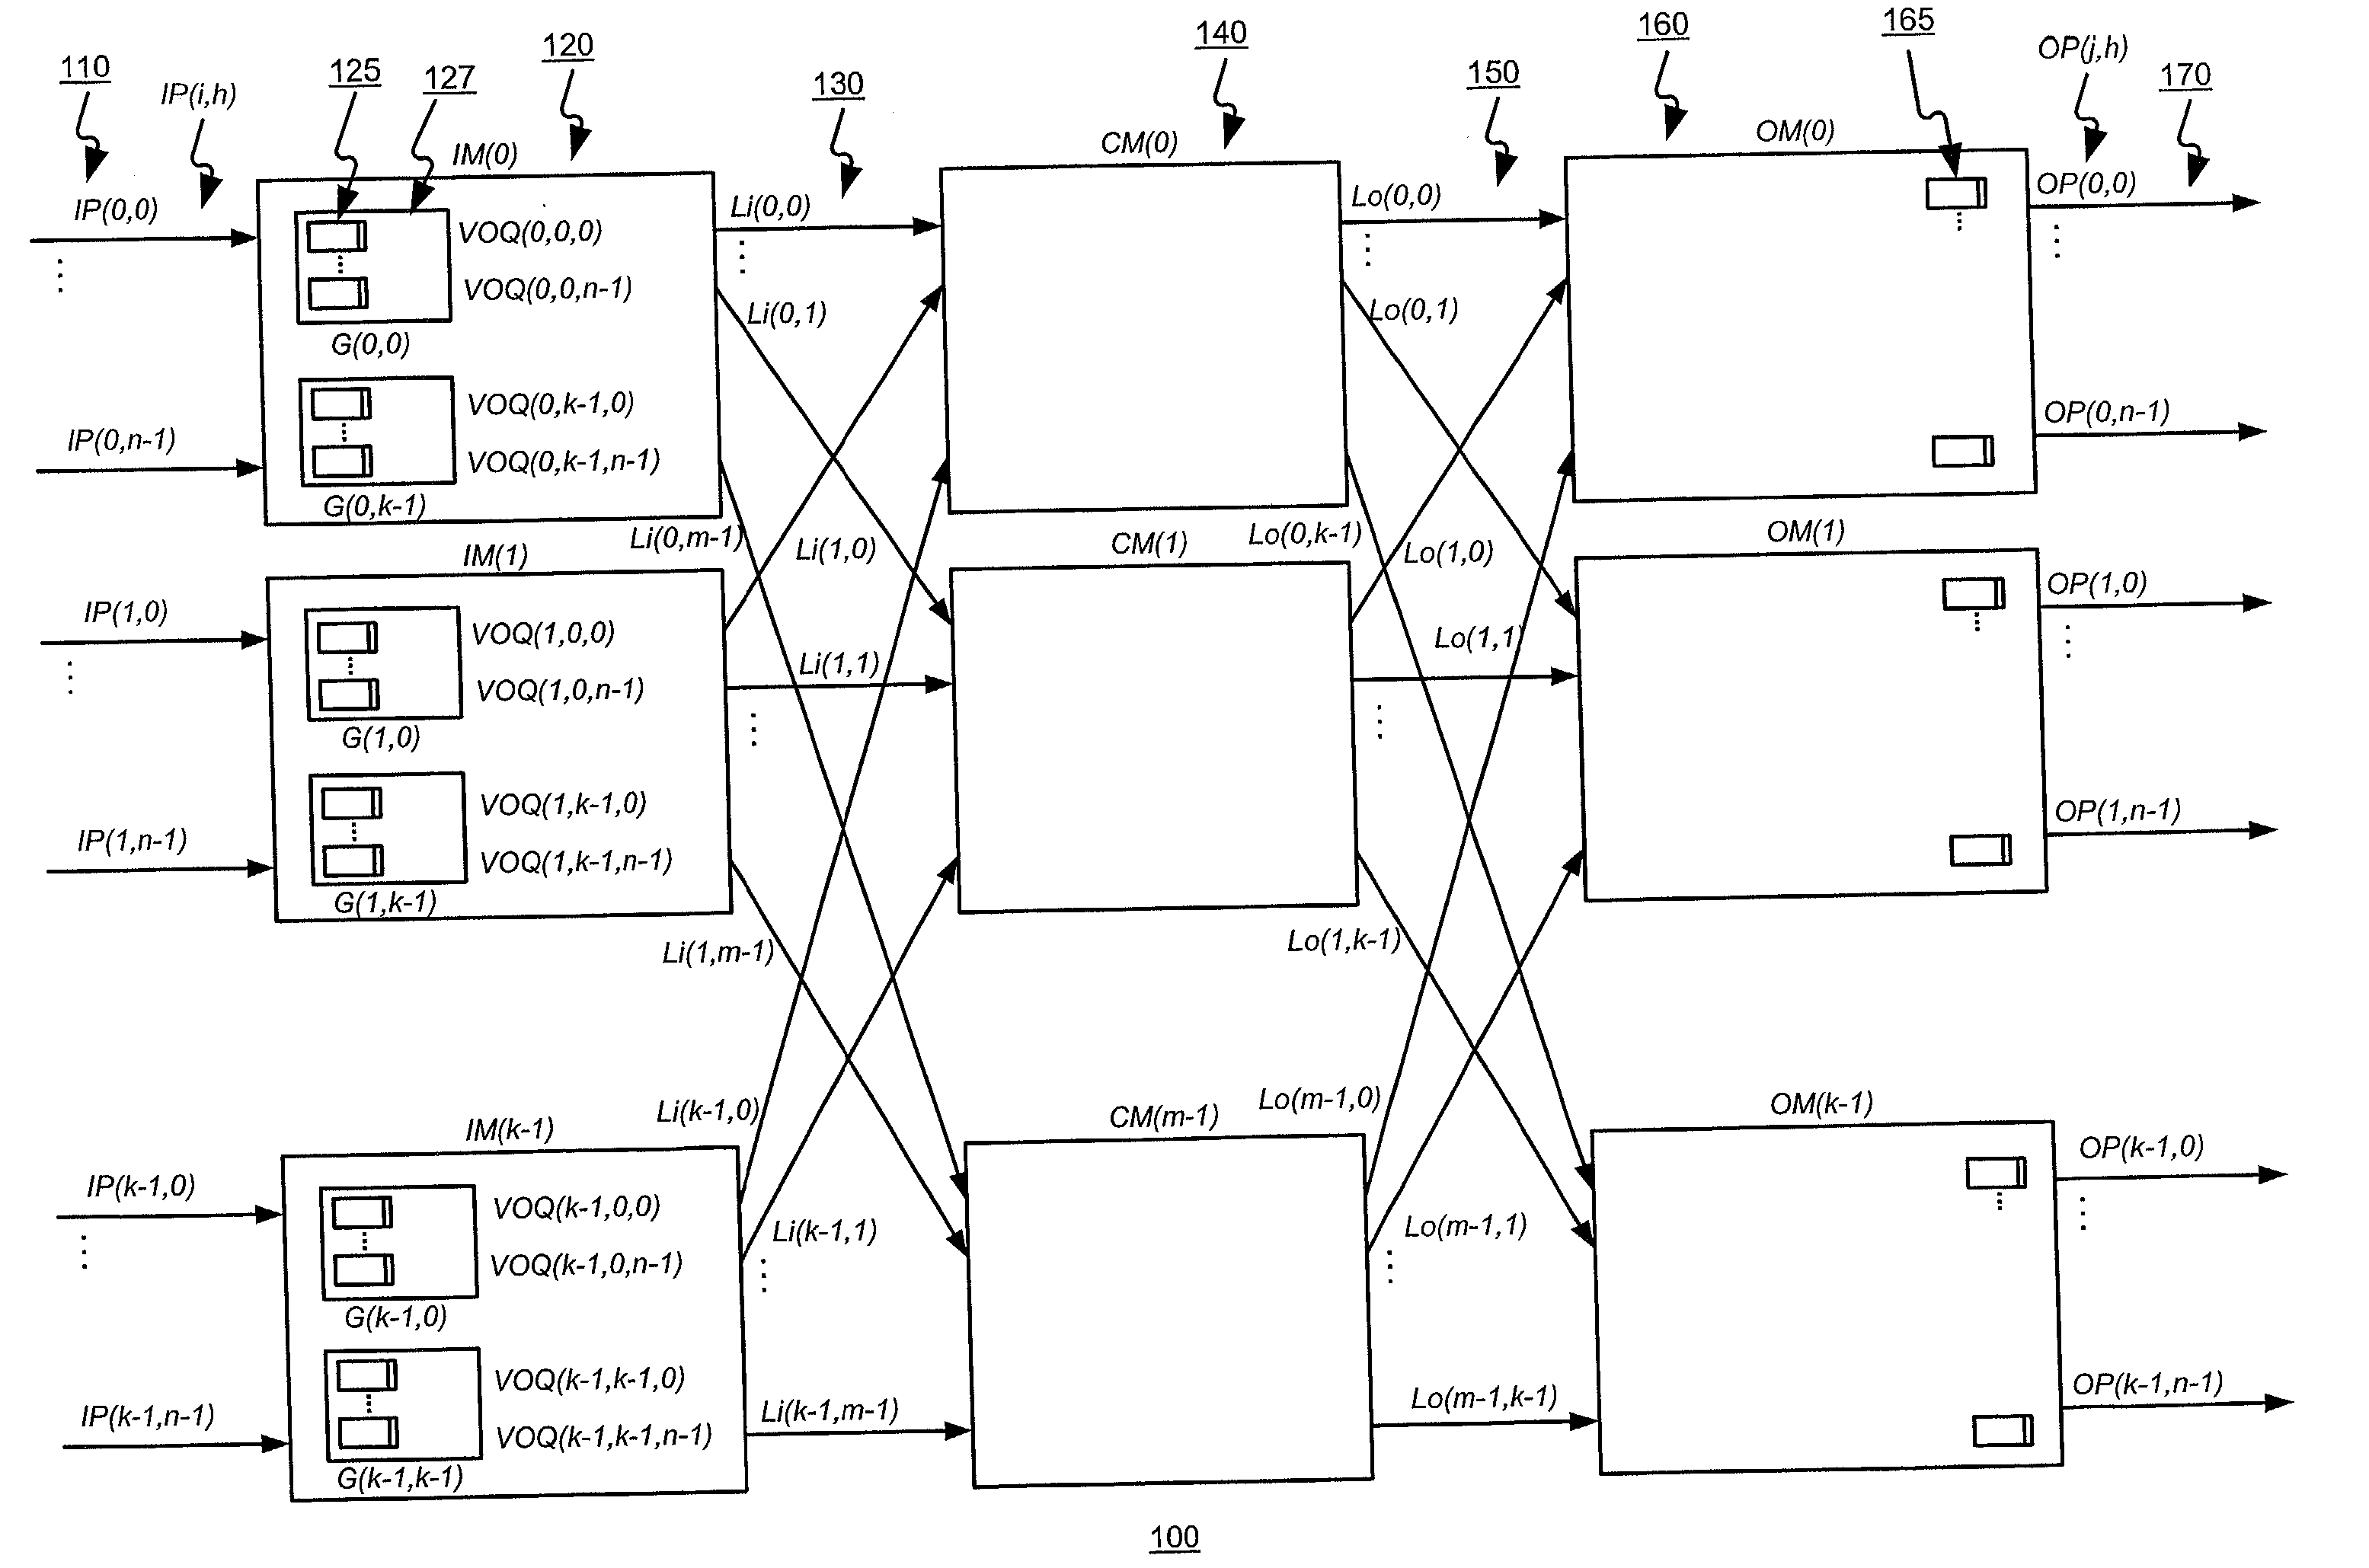 Scheduling the dispatch of cells in multistage switches using a hierarchical arbitration scheme for matching non-empty virtual output queues of a module with outgoing links of the module